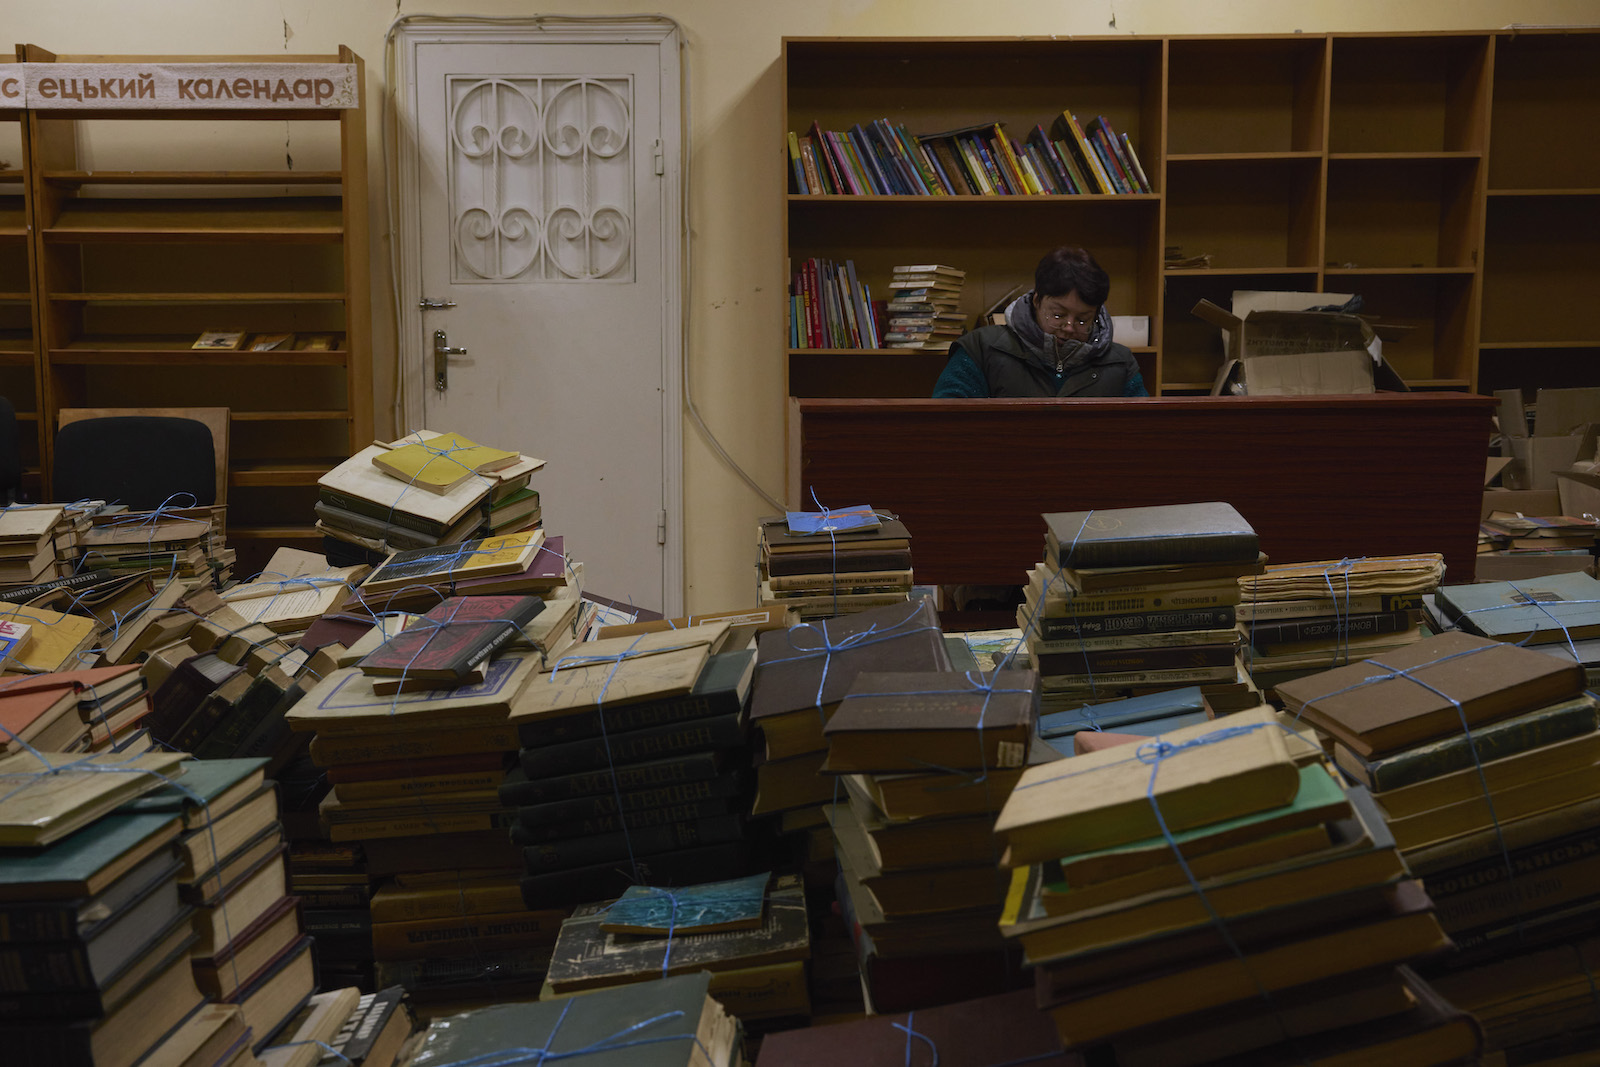 A librarian works at a desk, with piles of bundled library books in the foreground